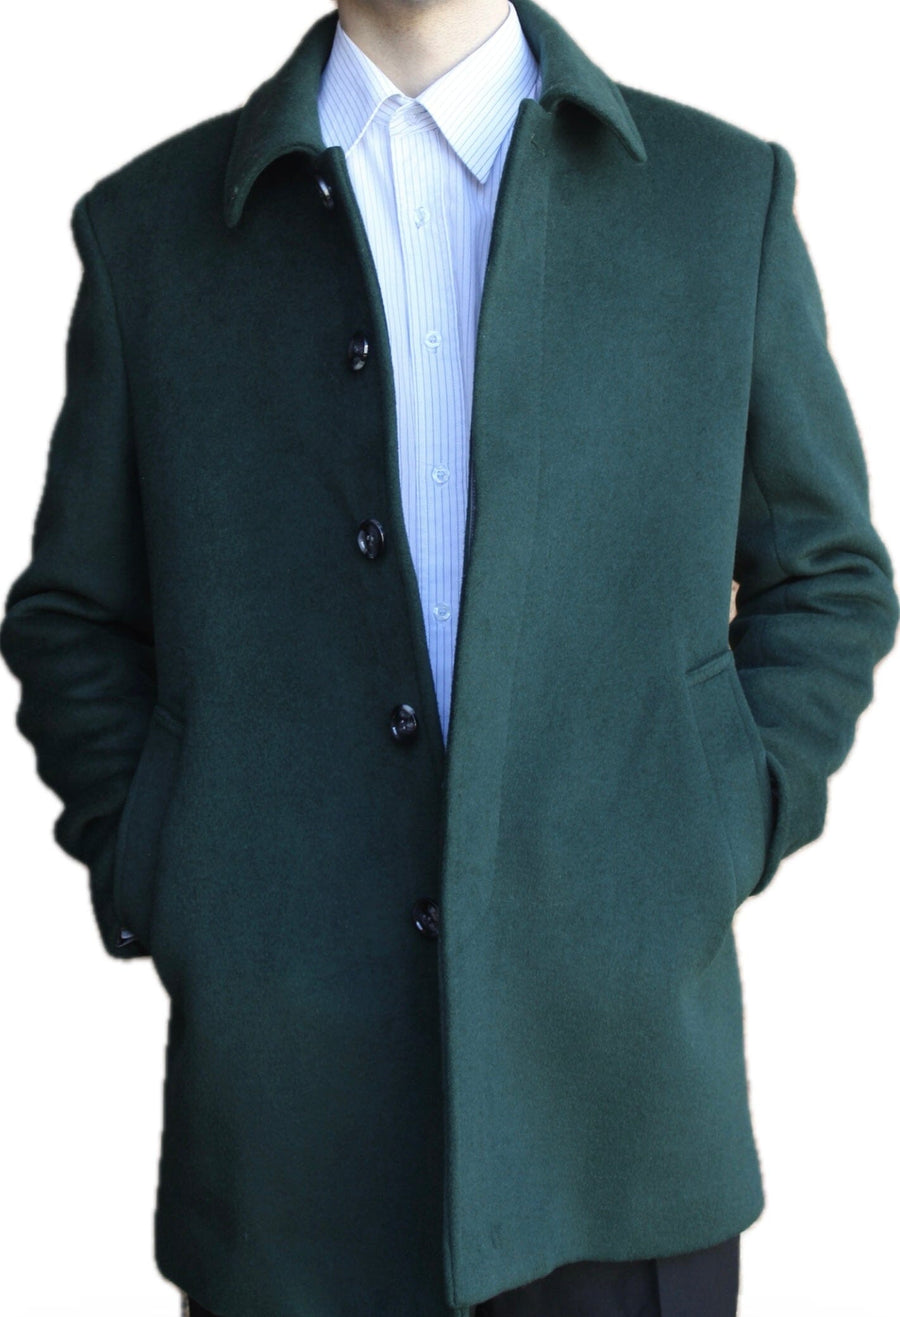 Ethan Double Cashmere Jacket - Green Jacket Teddy Sinclair (China) XS 